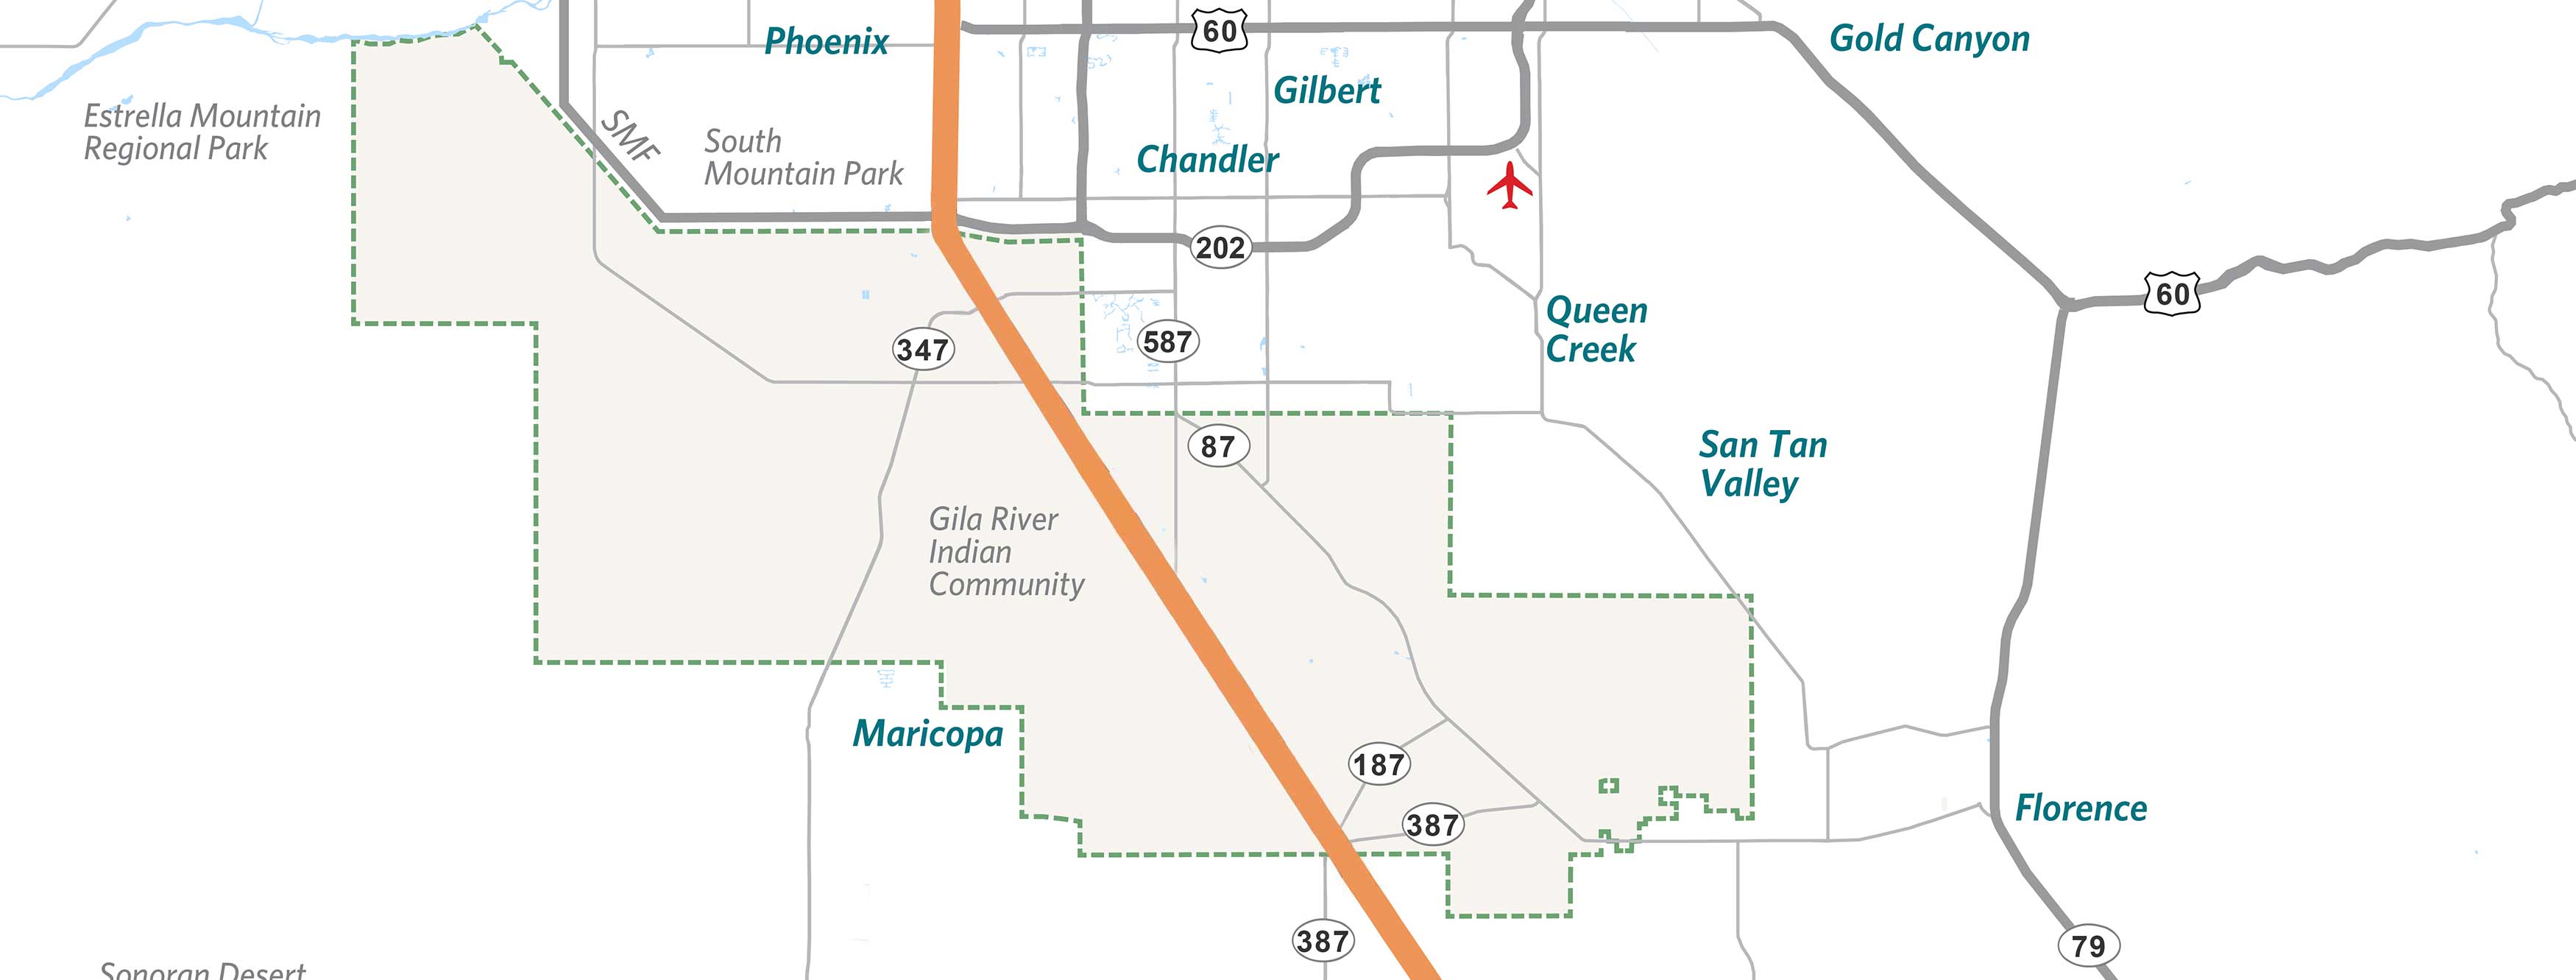 Map of the Gila River Indian Community region